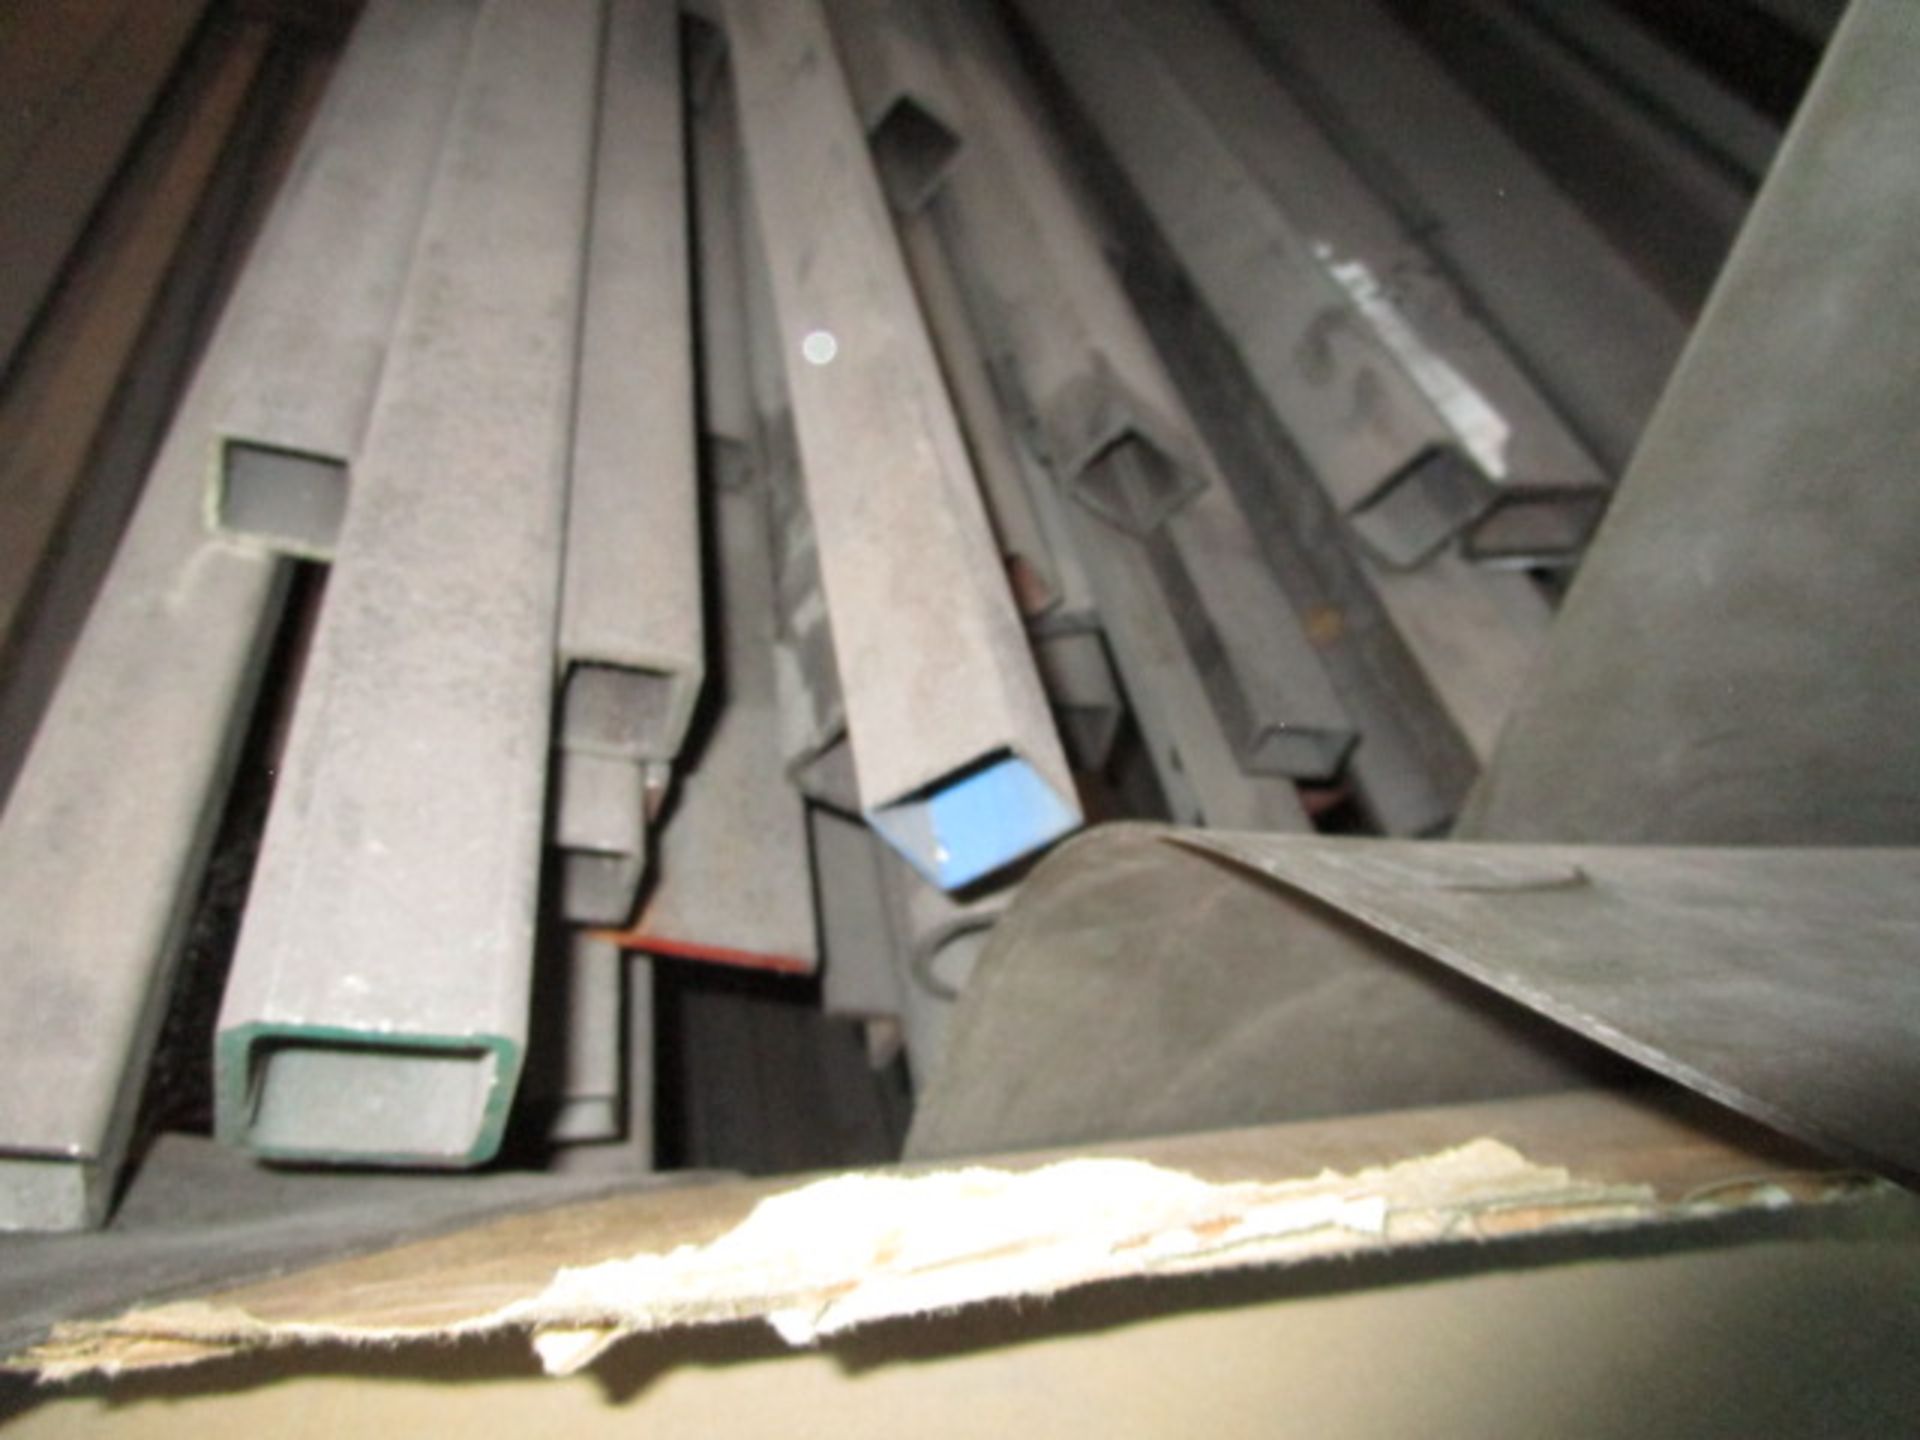 Assorted Metal Tubing, Flat Stock, And Other Assorted Raw Metal Materials On Rack (250" x 112" w) - Image 8 of 9